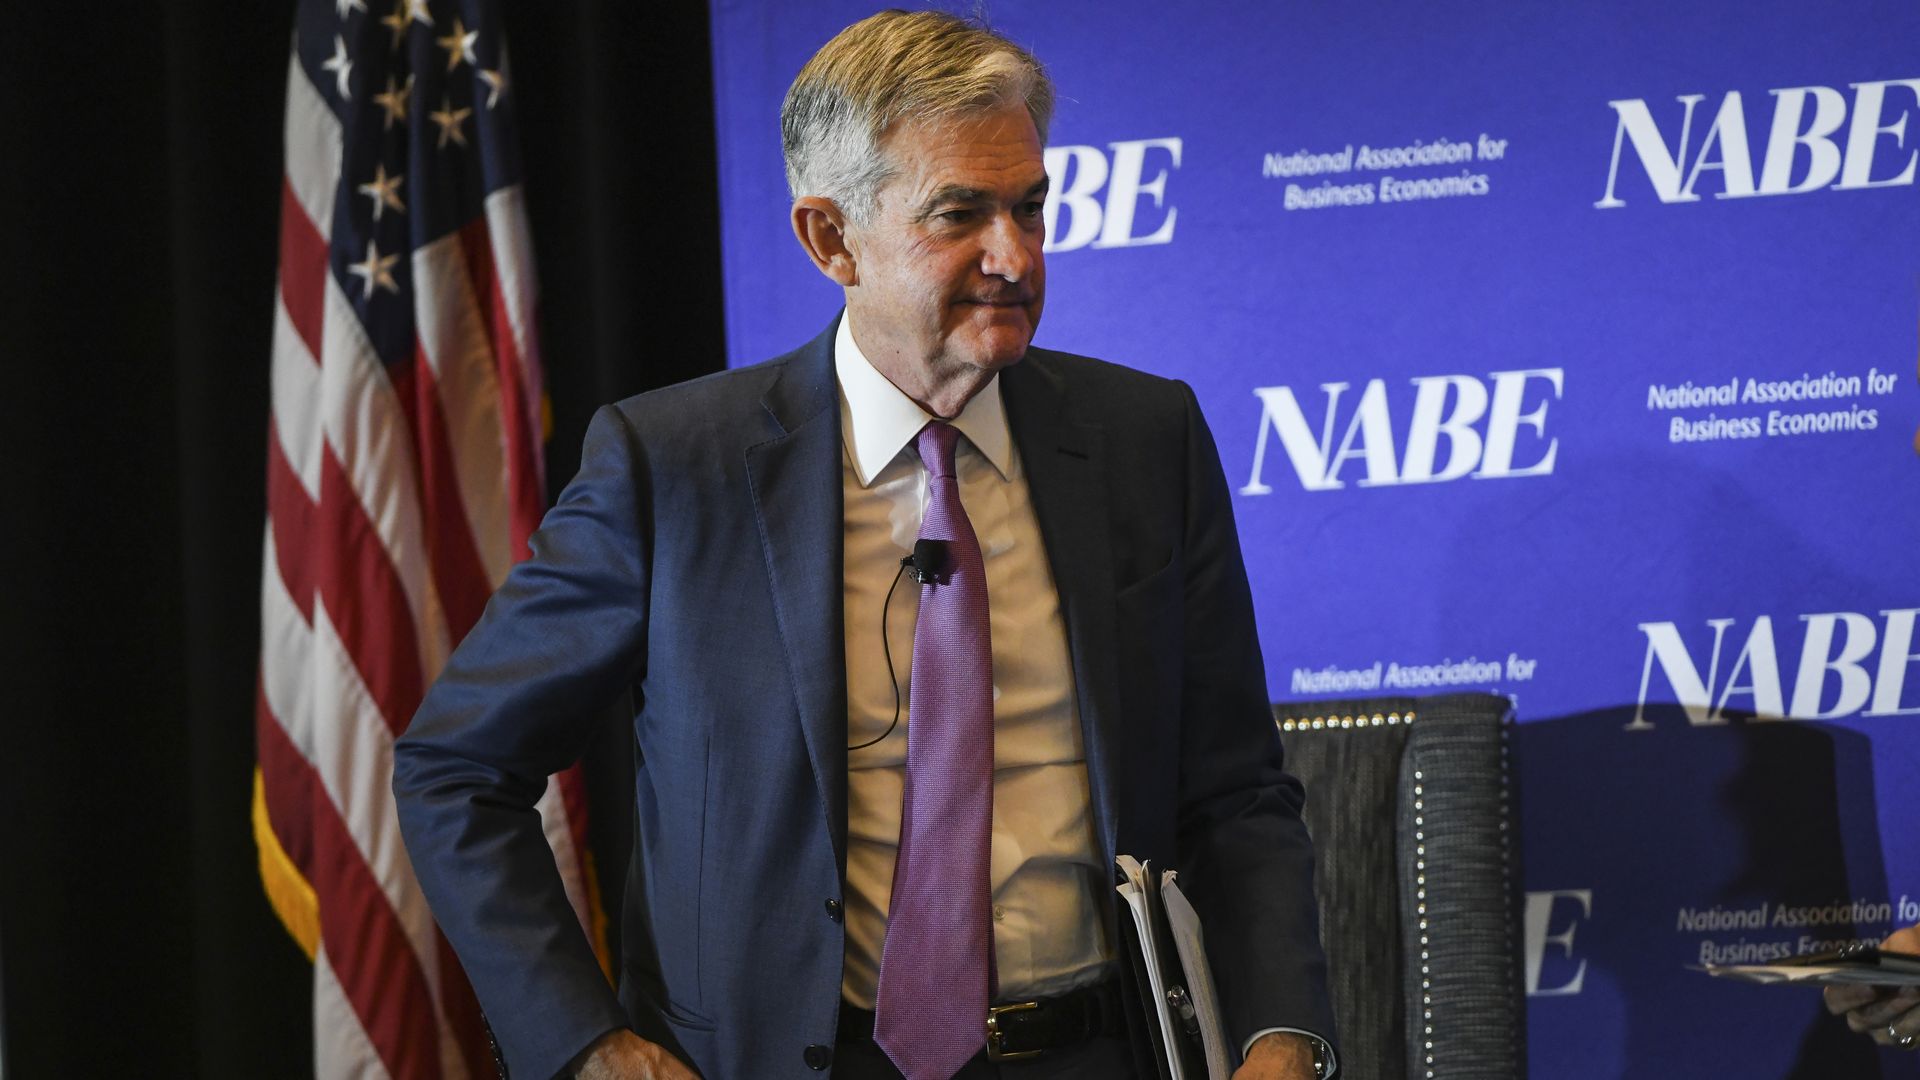 Fed chair Jerome Powell at a NABE conference